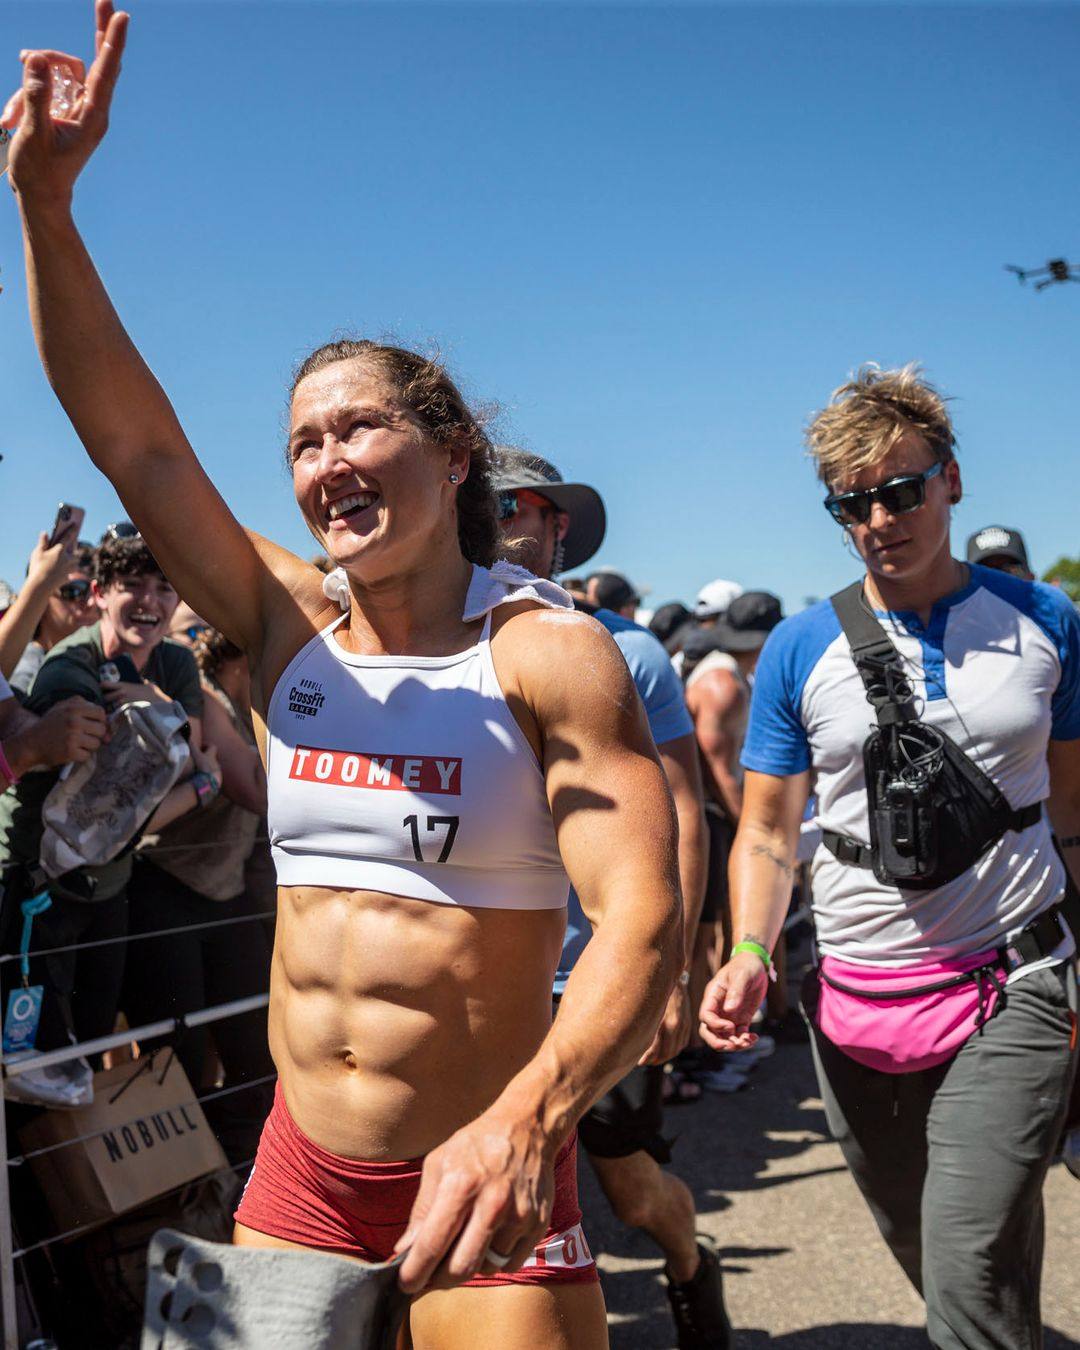 Tia-Clair Toomey waves to the fans at the 2022 CrossFit Games on day 3. Photo: CrossFit Games